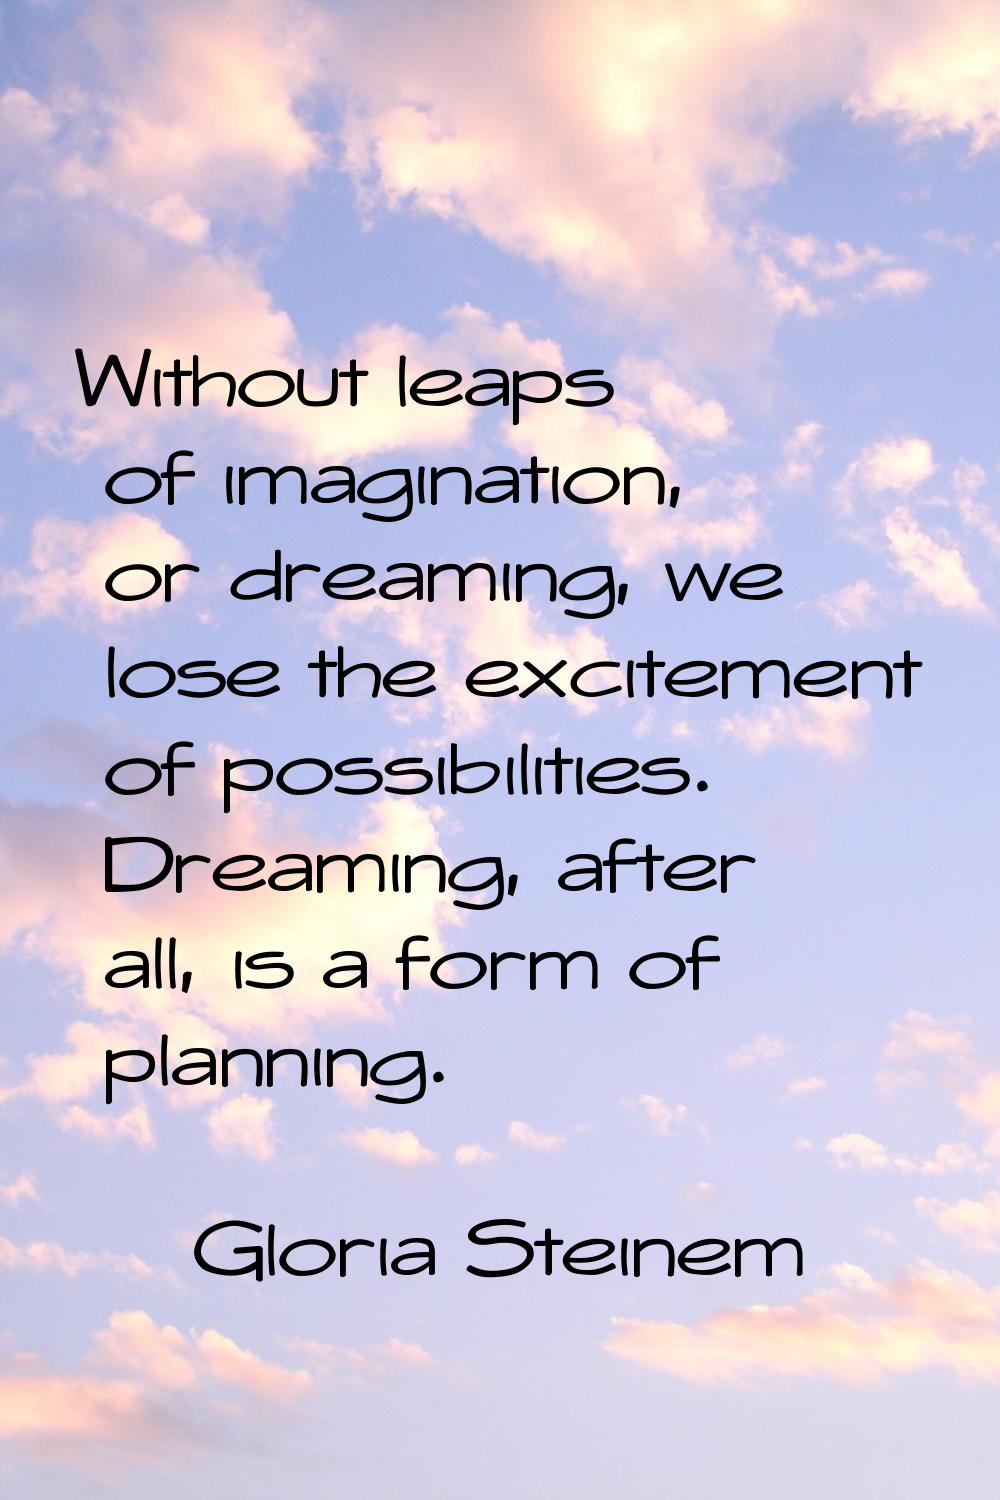 Without leaps of imagination, or dreaming, we lose the excitement of possibilities. Dreaming, after